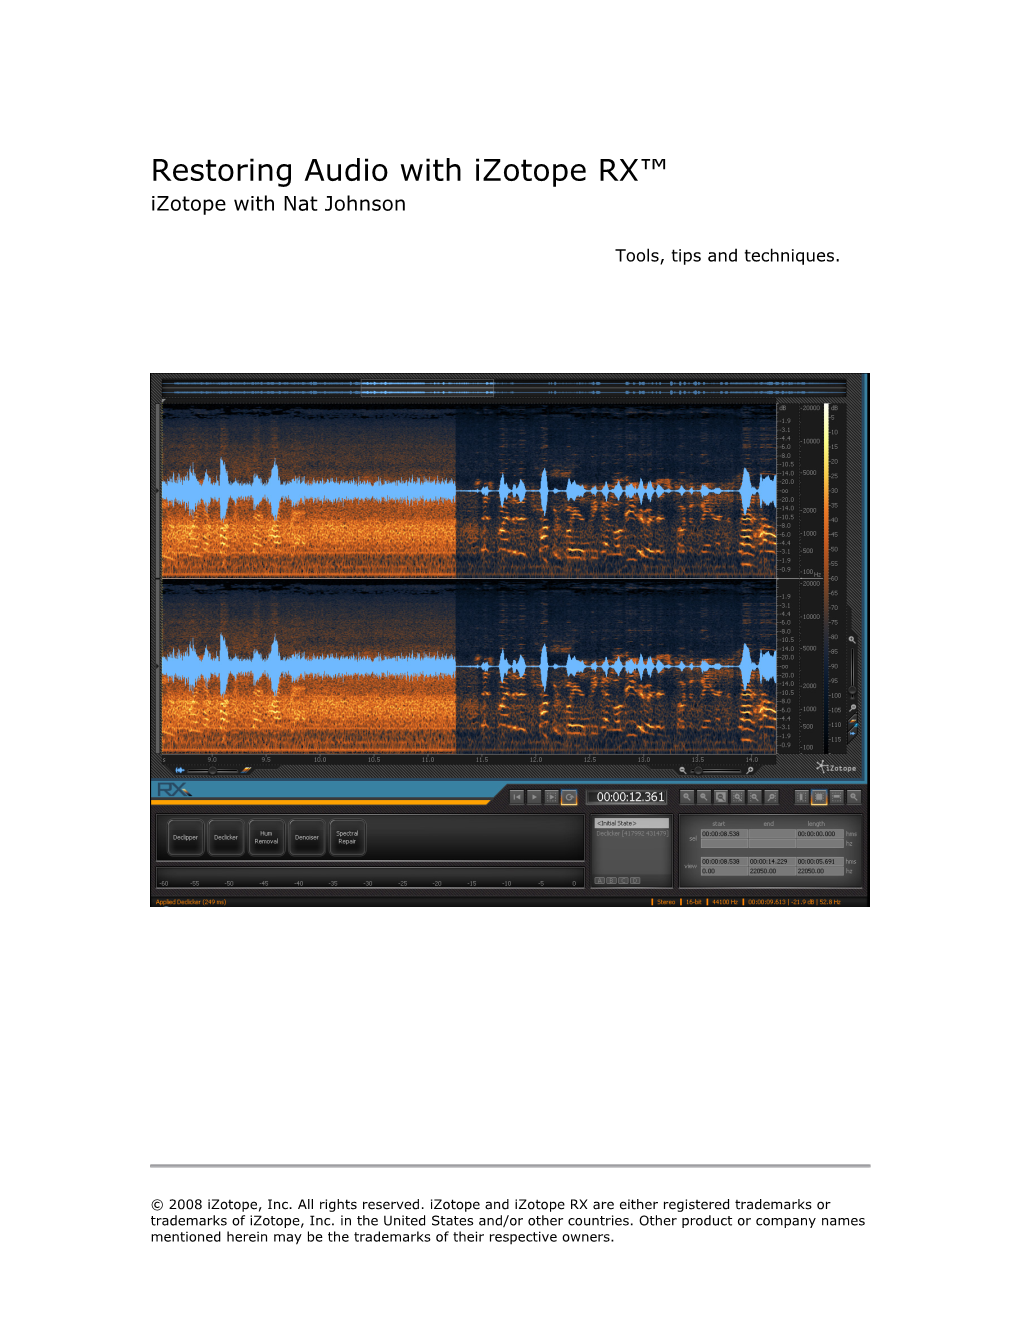 Restoring Audio with Izotope RX™ Izotope with Nat Johnson